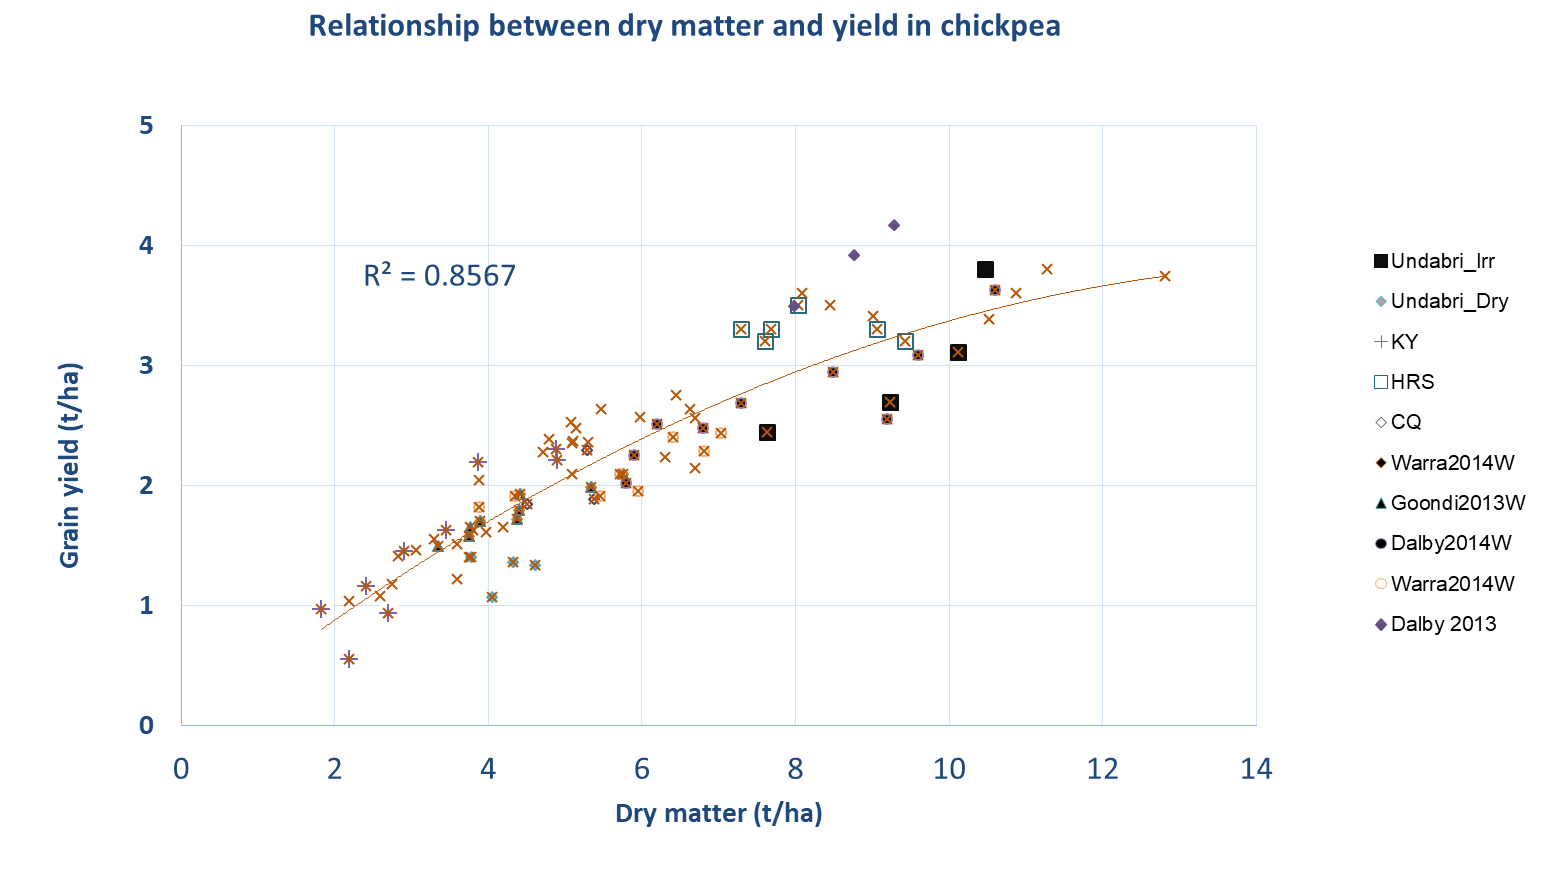 Figure 3 is a scatter graph that depicts the relationship ship between dry matter production and grain for chickpea trials at 10 sites over 3 years